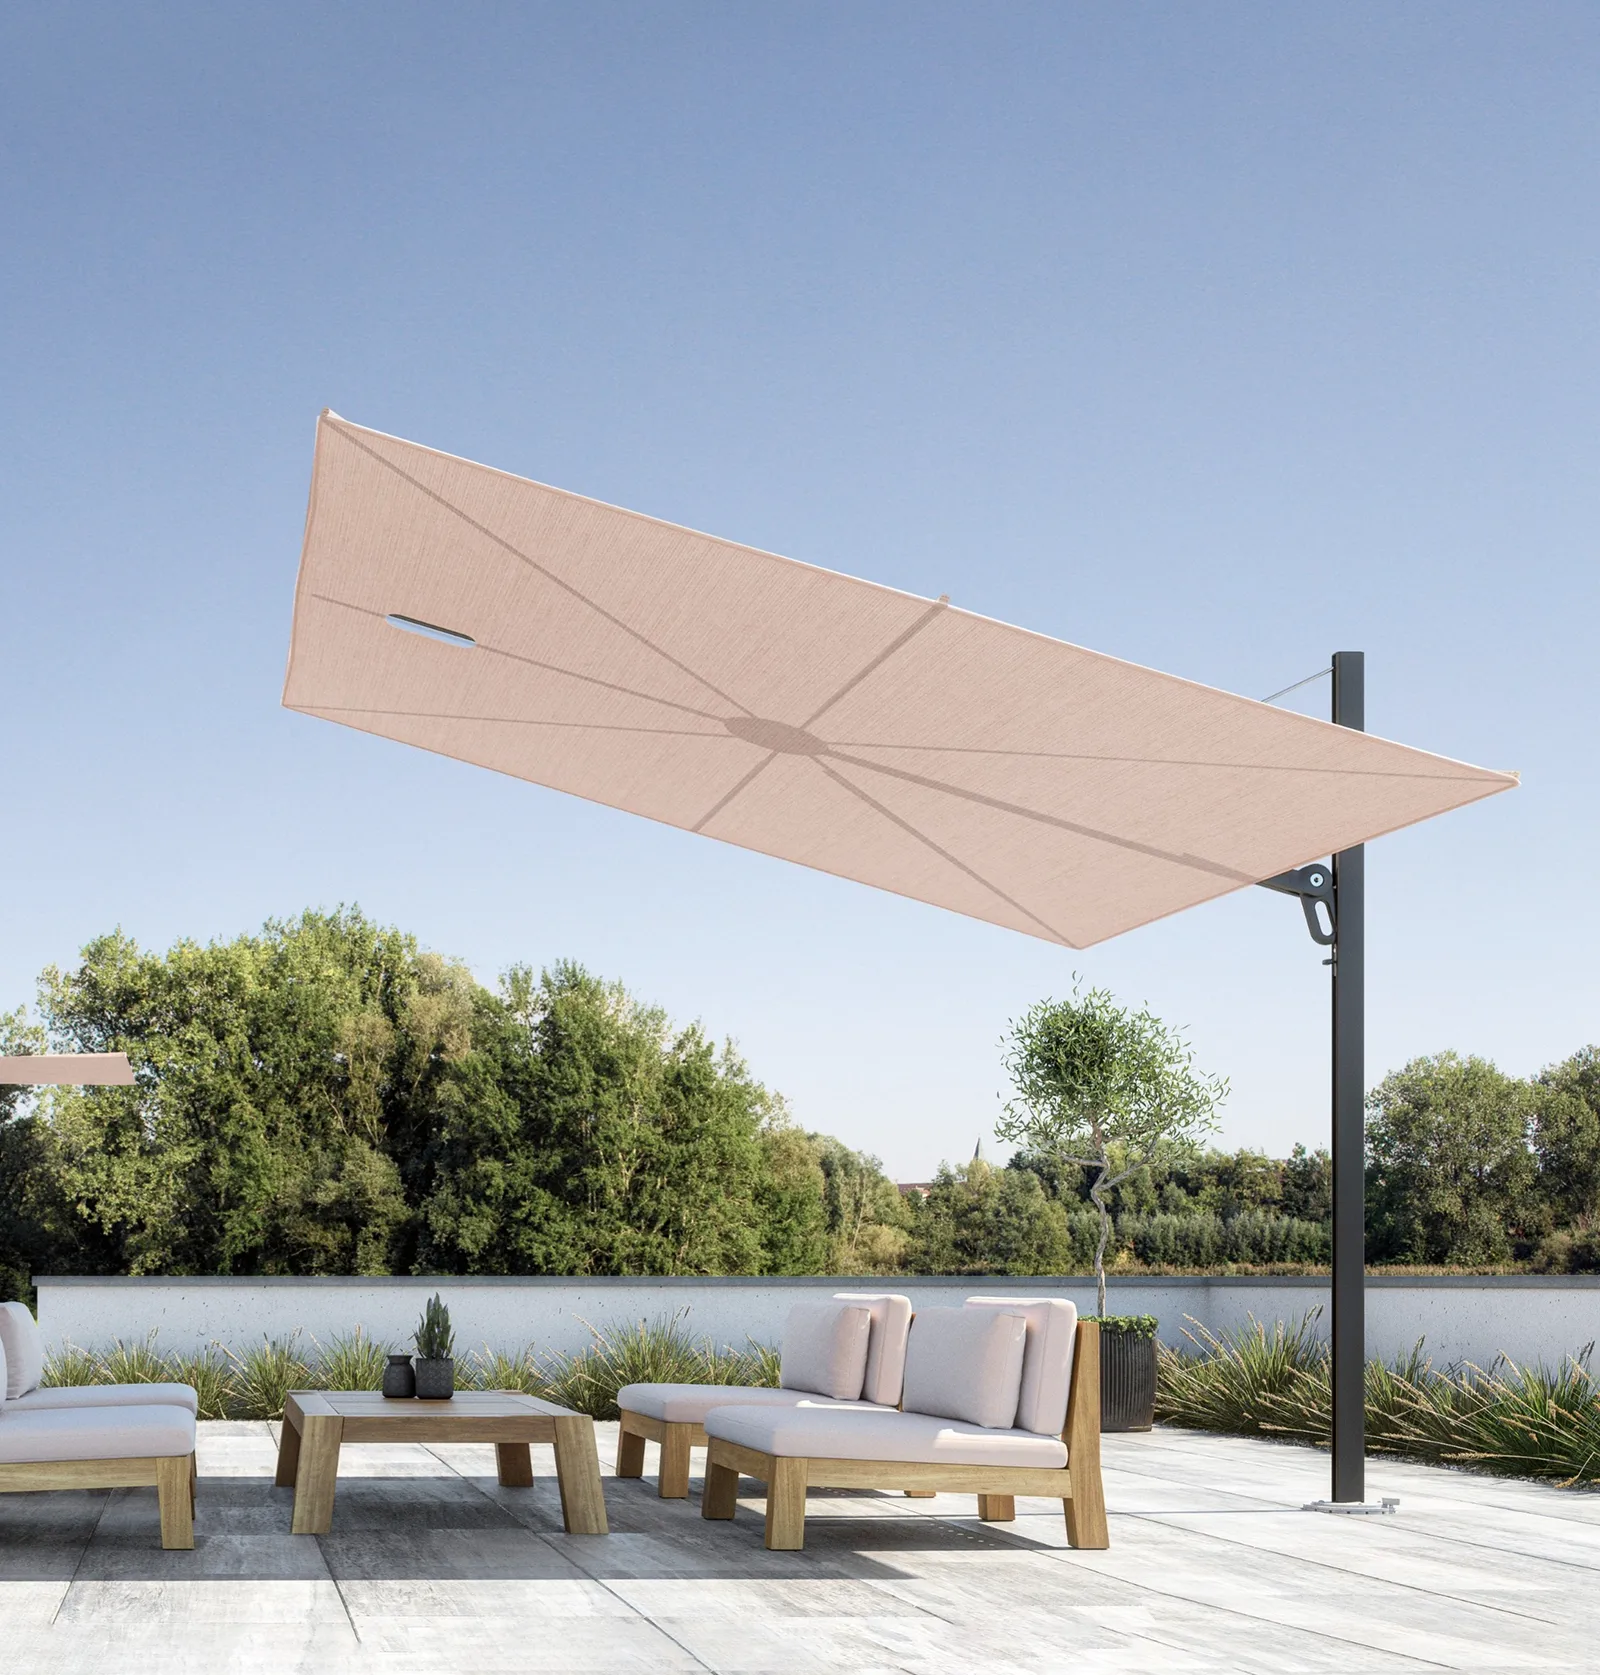 Find out more about UMBROSA's product ranges. Contemporary sunshades and shade solutions.